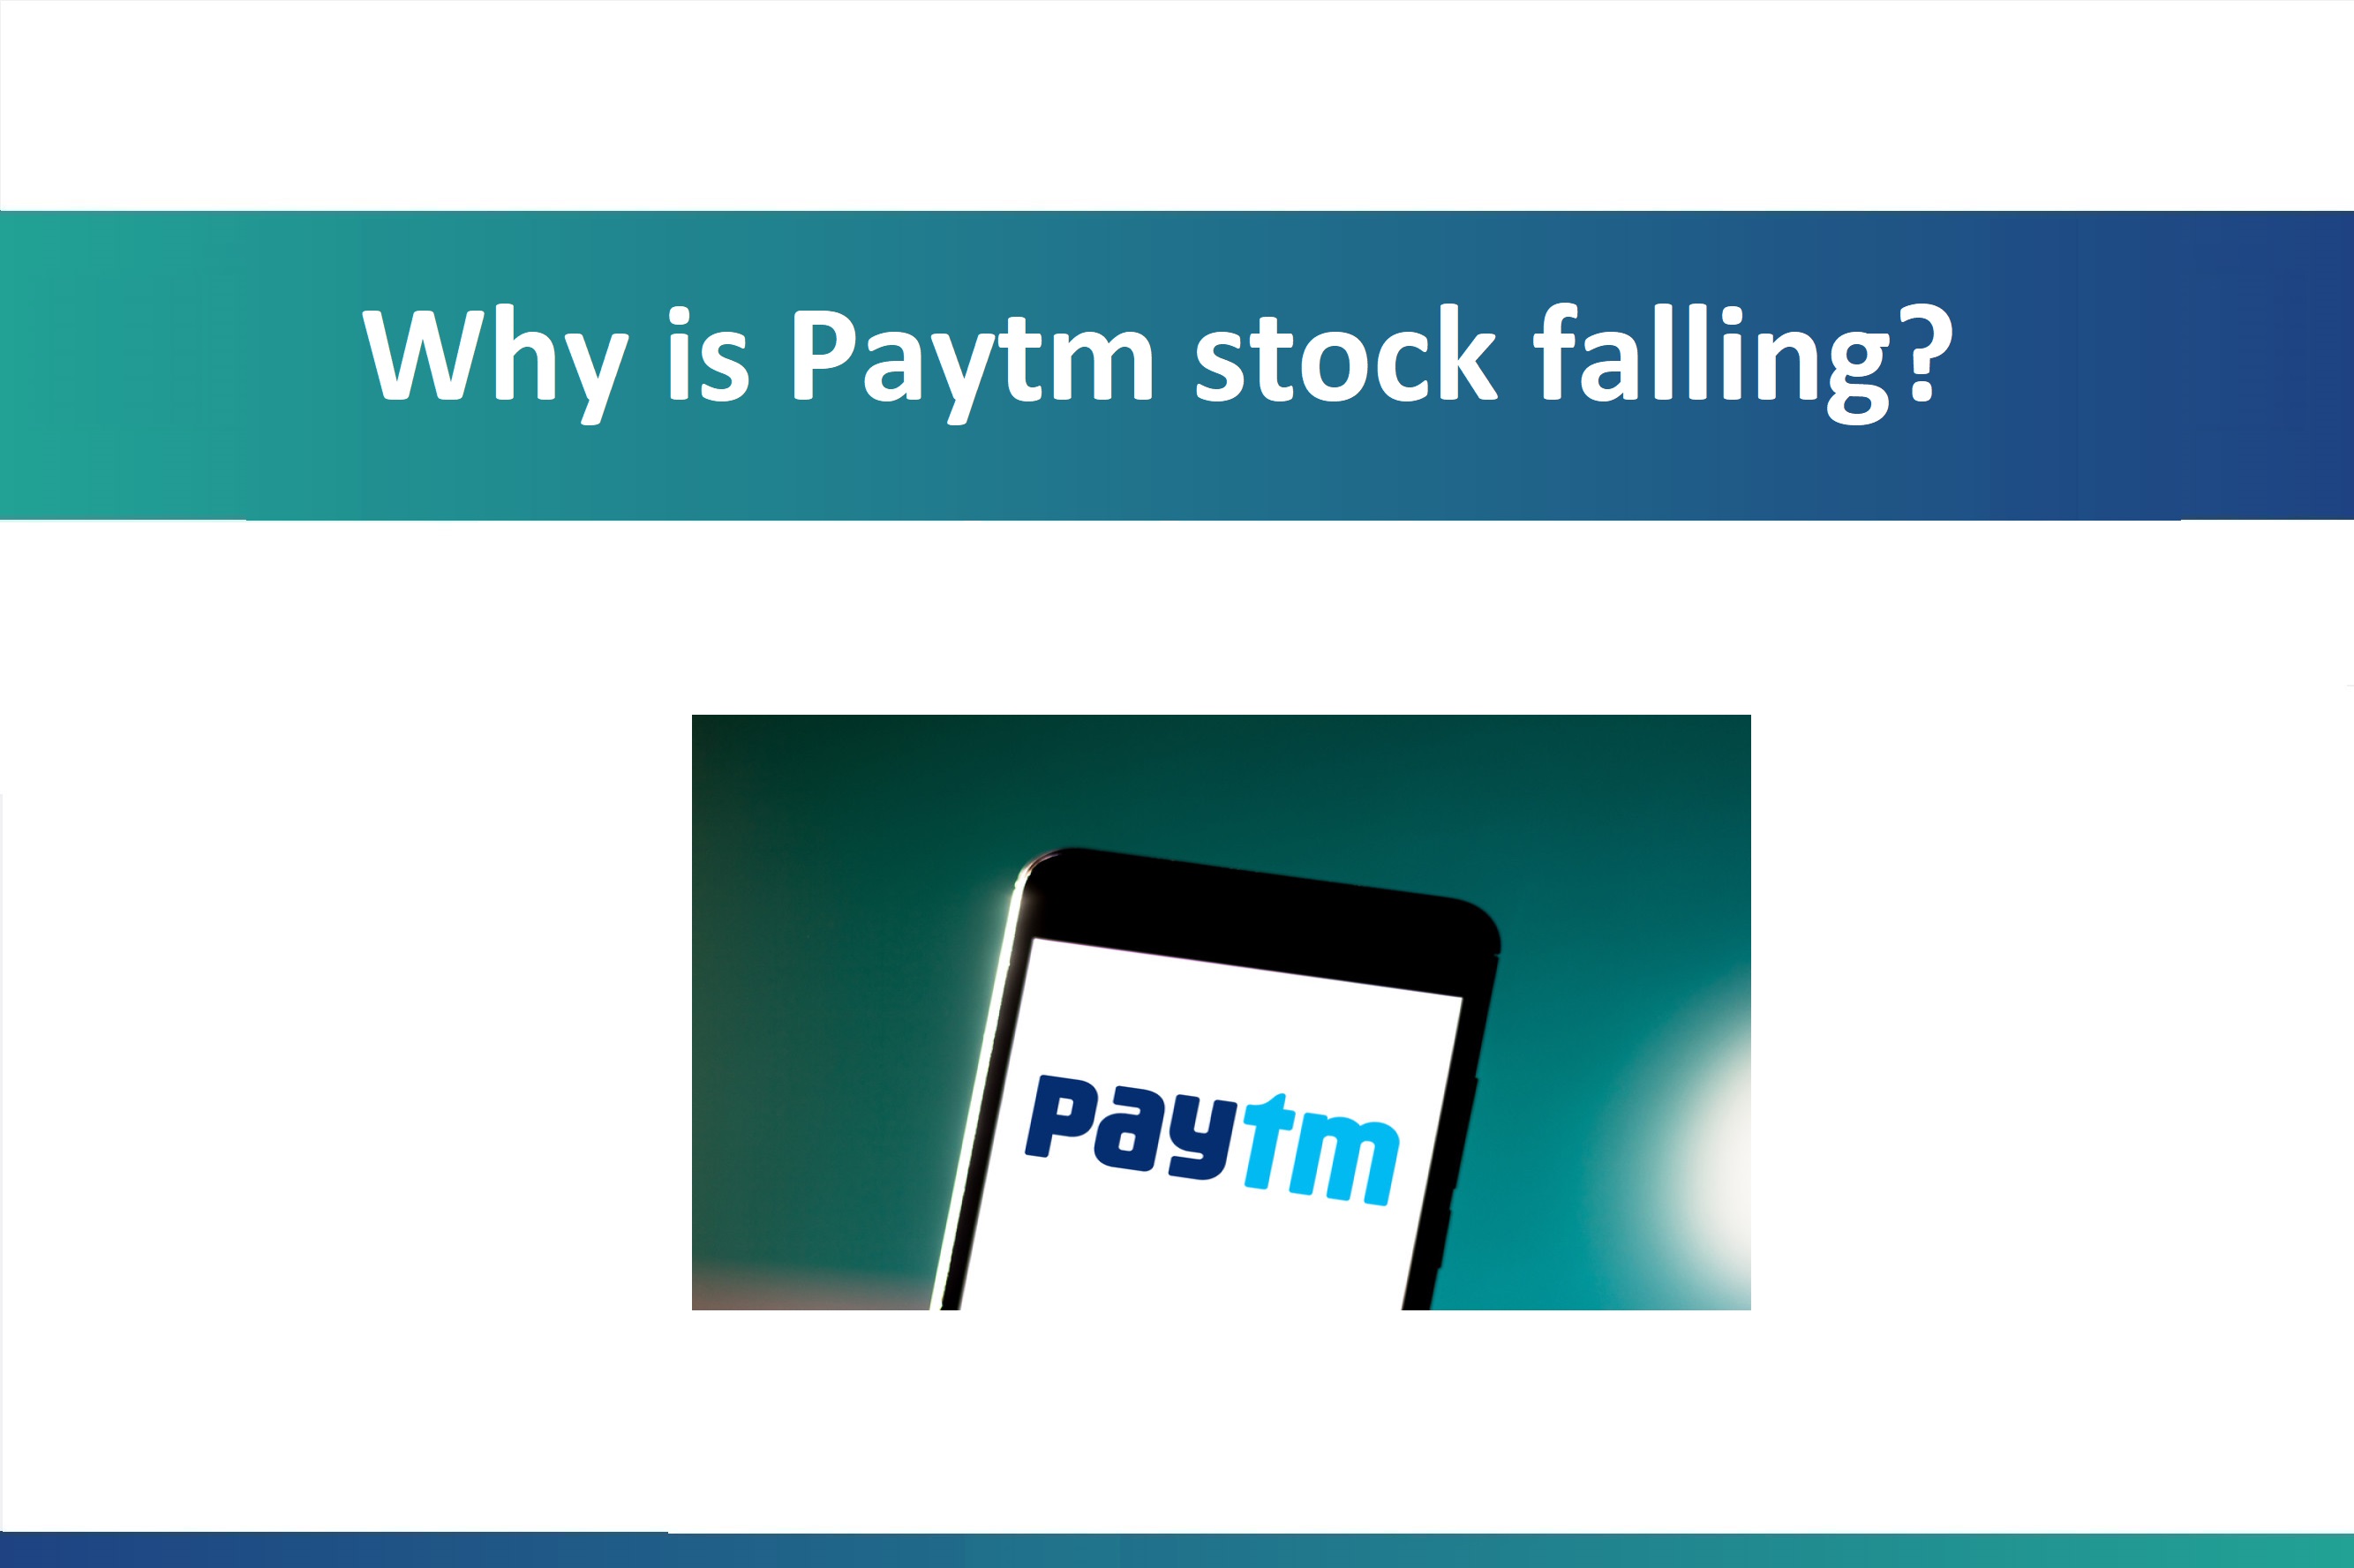 Why is Paytm stock falling?